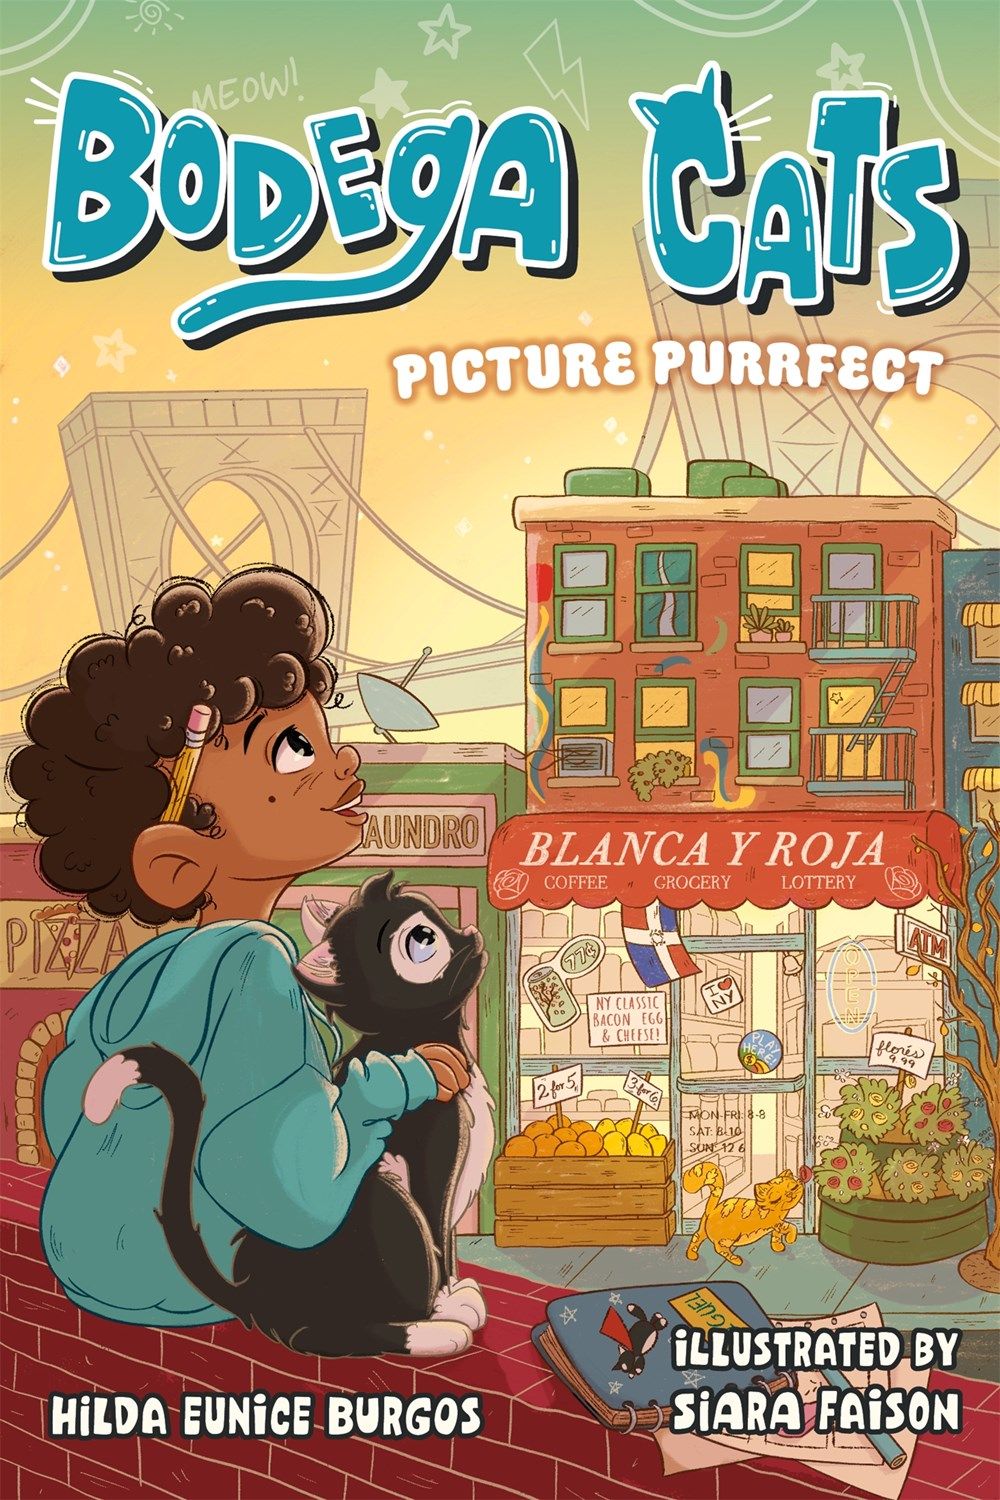 Cover of Bodega Cats: Picture Purrfect by Hilda Eunice Burgos, illustrated by Siara Faison